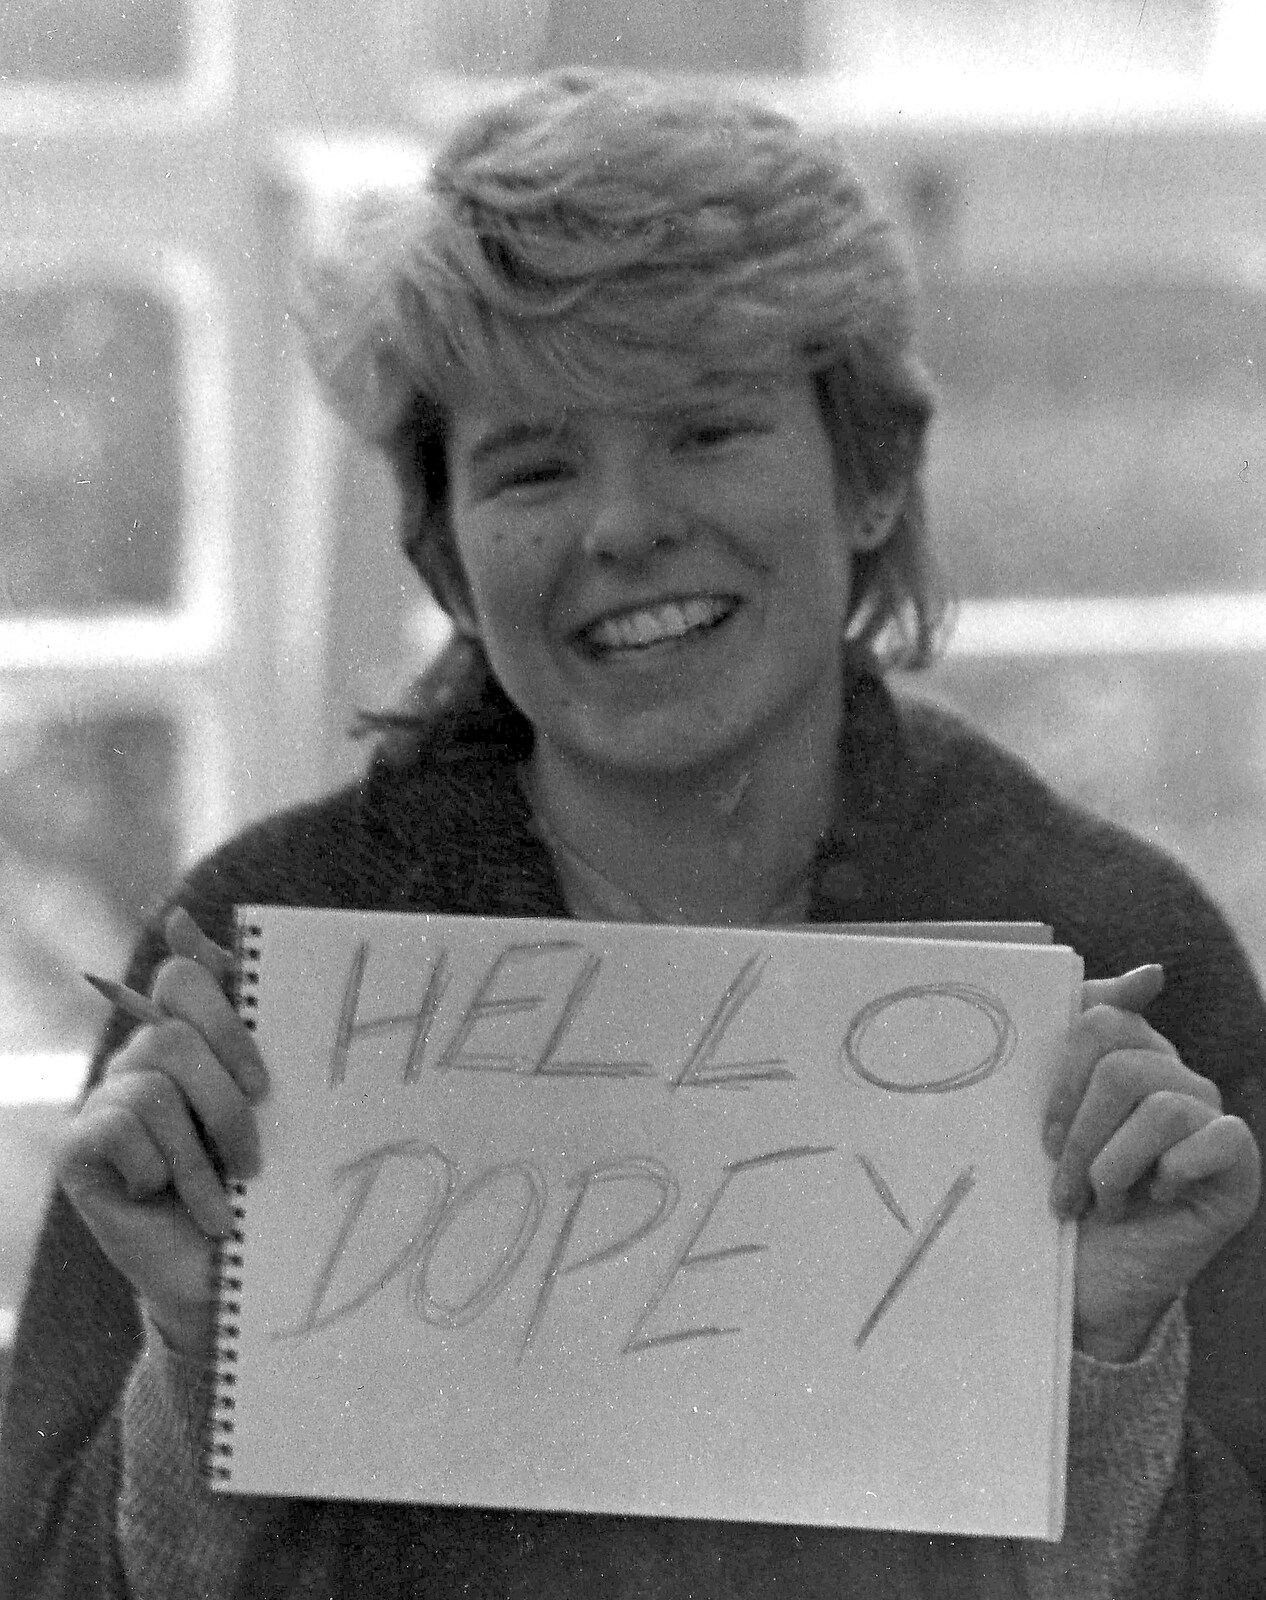 Jo holds up a 'hello Dopey' sign from Learning Black-and-White Photography, Brockenhurst College, Hampshire - 10th March 1985